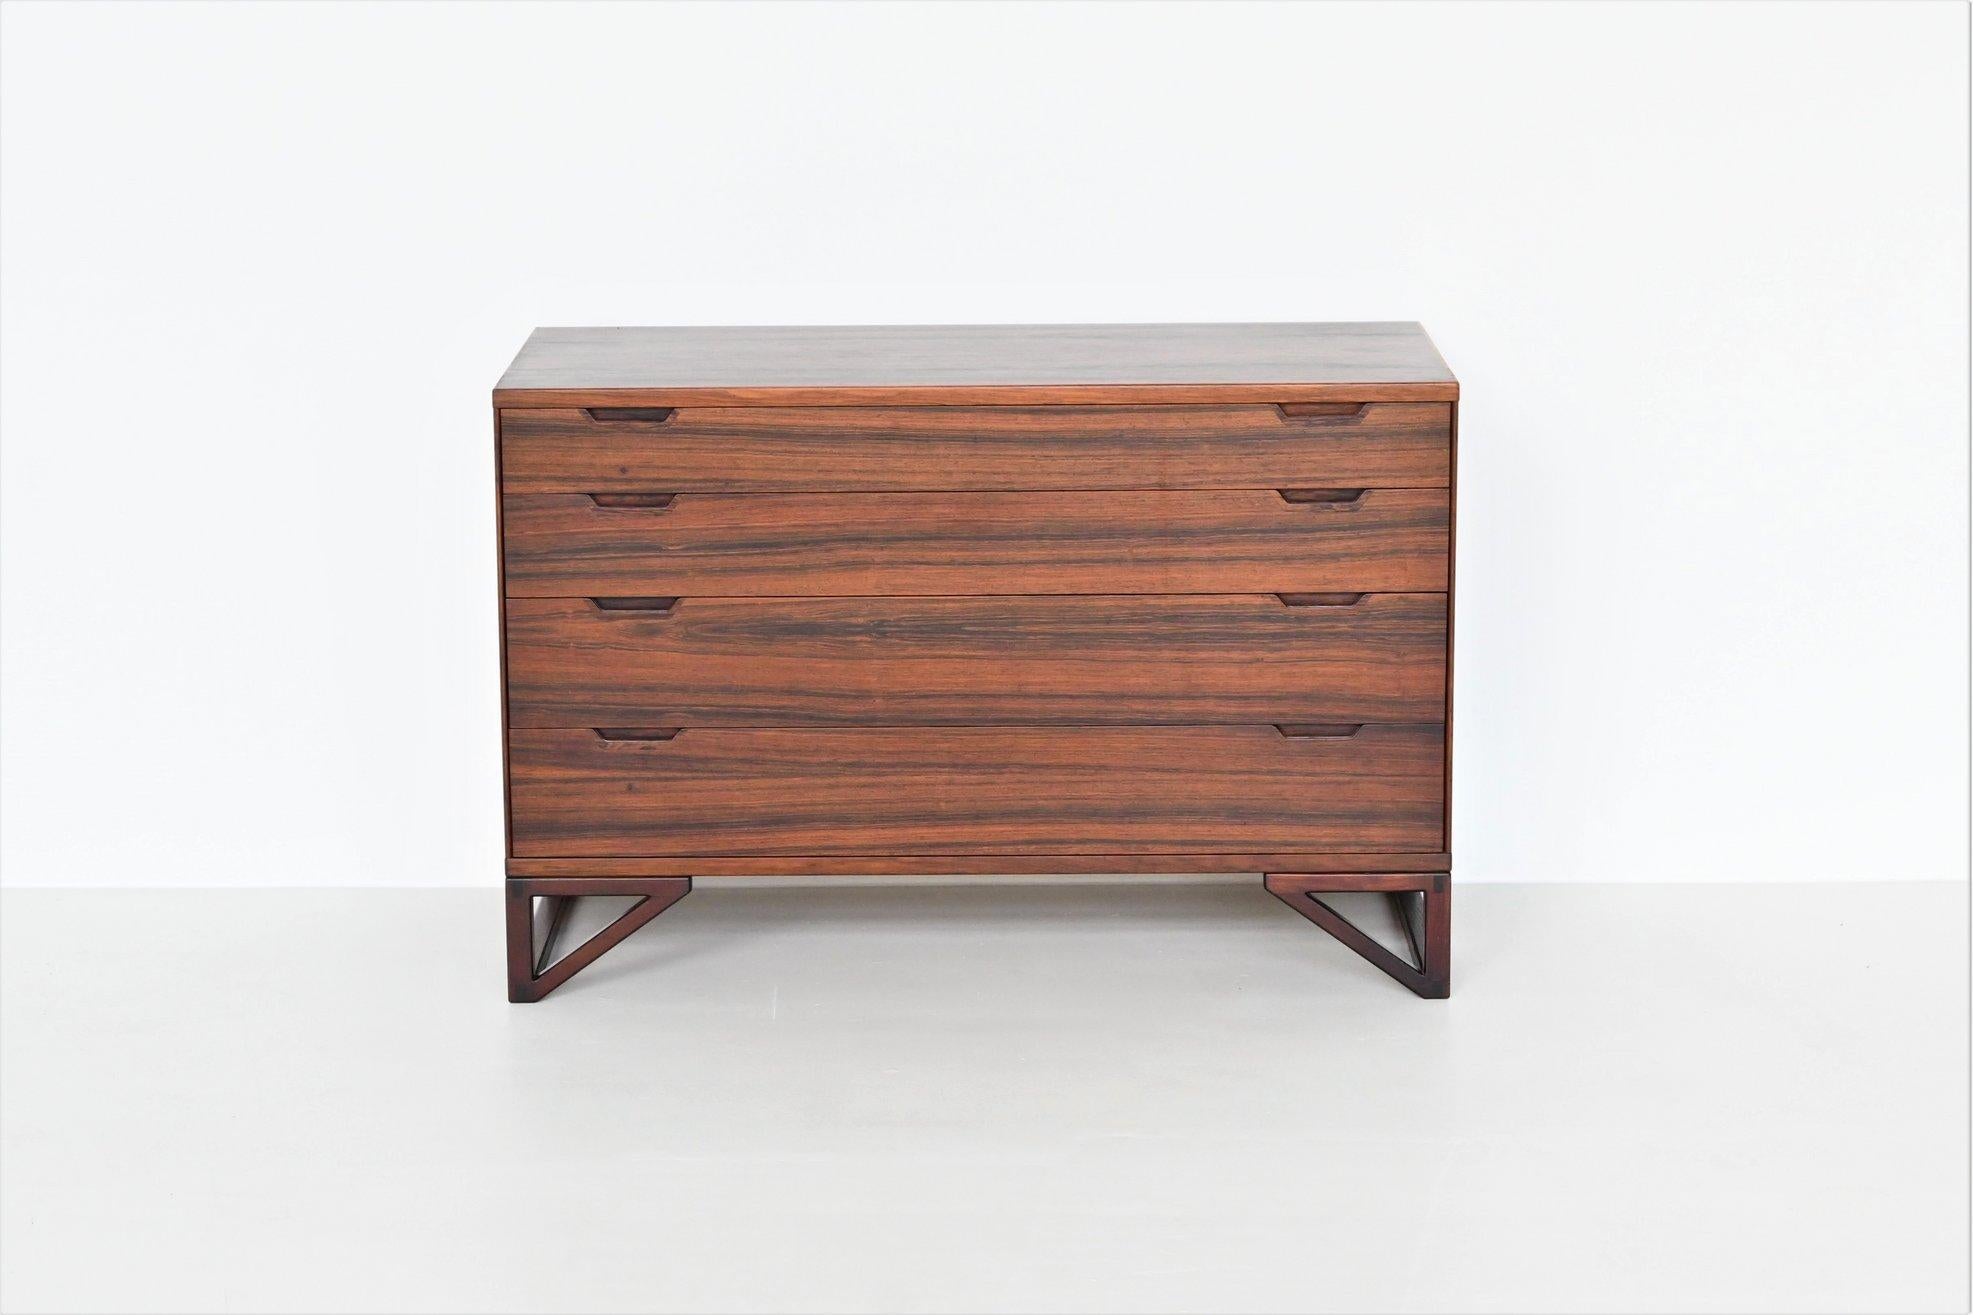 Stunning and refined chest of drawers designed by Svend Langkilde for Illums Bolighus, Denmark 1960. This well-crafted cabinet is executed in amazingly grained veneered rosewood supported by solid hardwood legs. These beautiful legs emphasize the